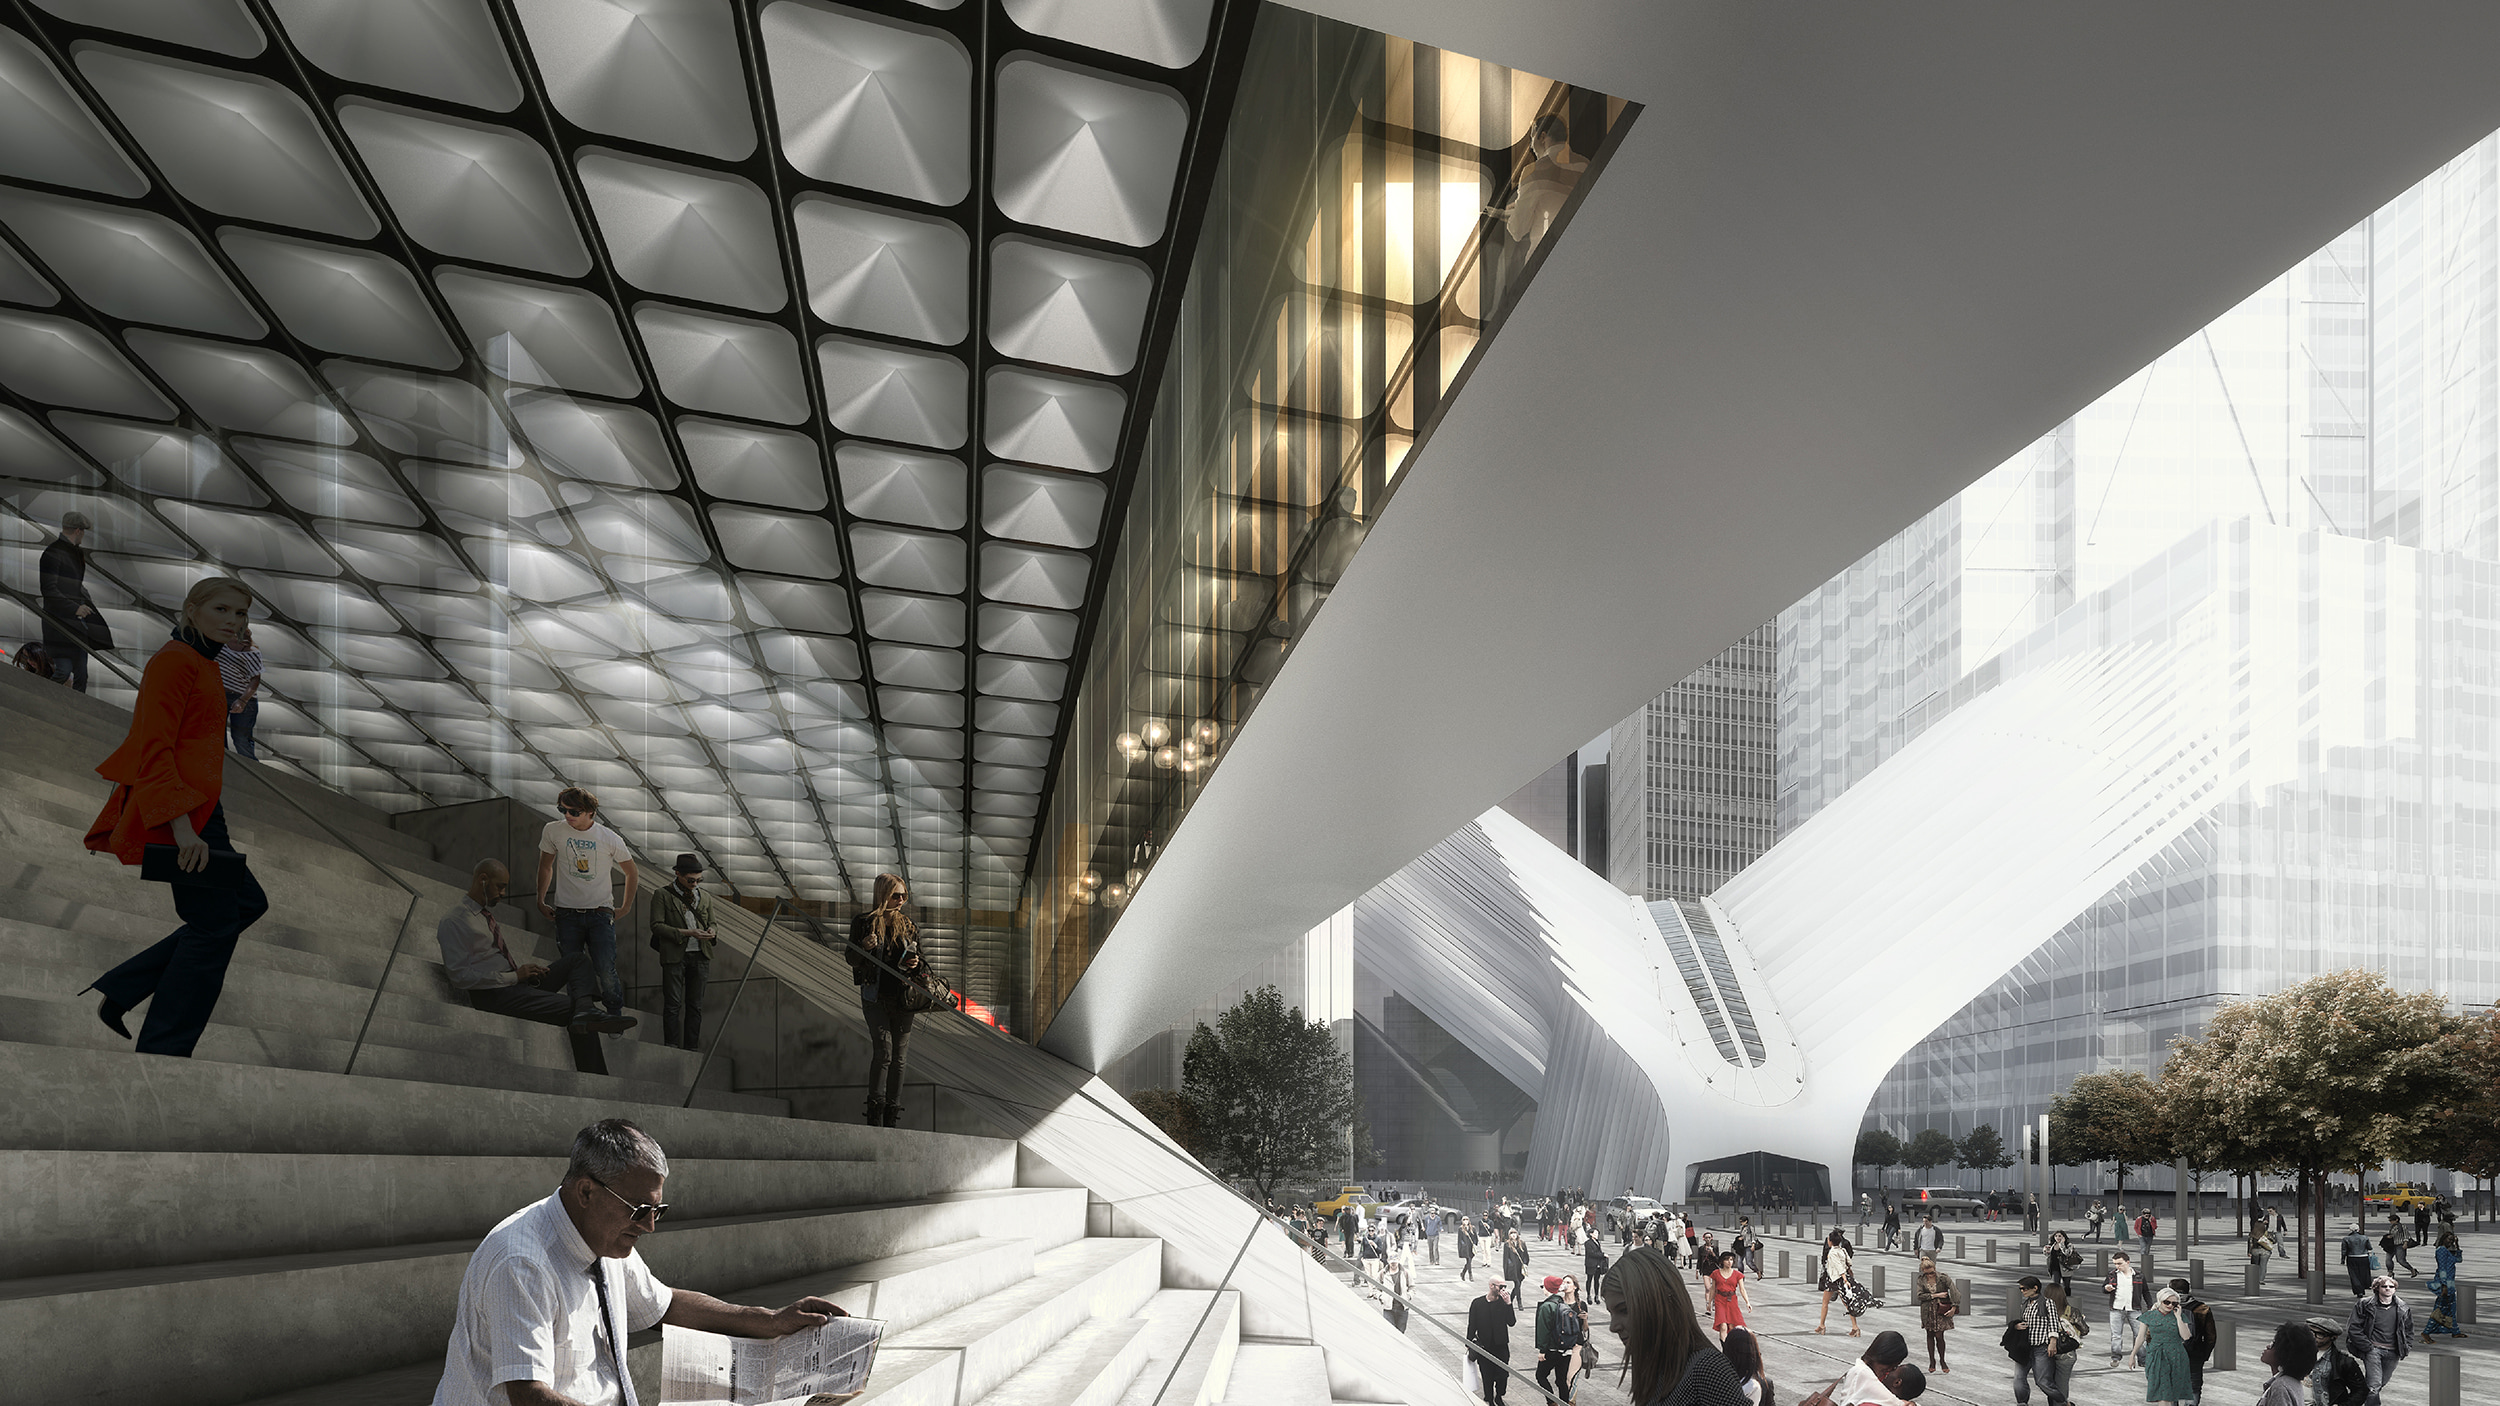 A visualization of the entry stairs of The Perelman Performing Arts Center at the World Trade Center.